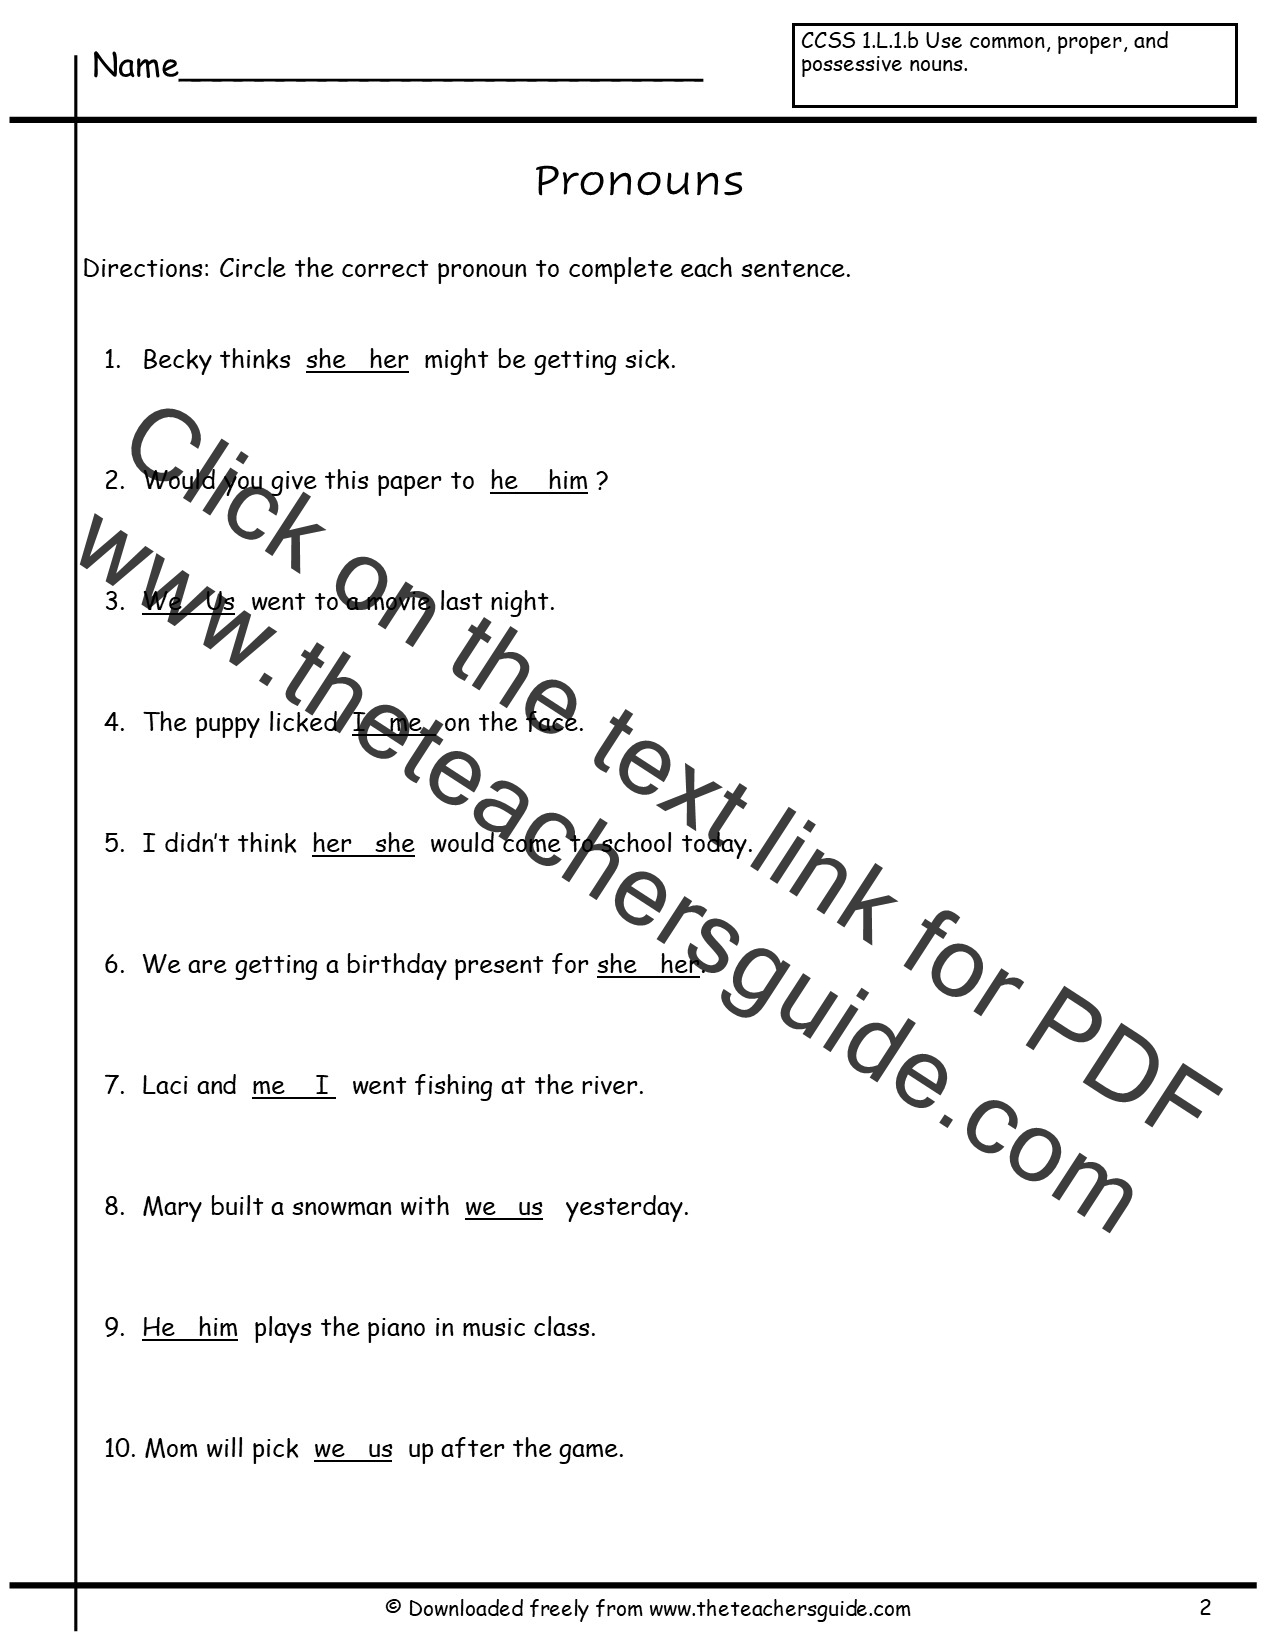 Pronouns Nouns Worksheets From The Teacher s Guide